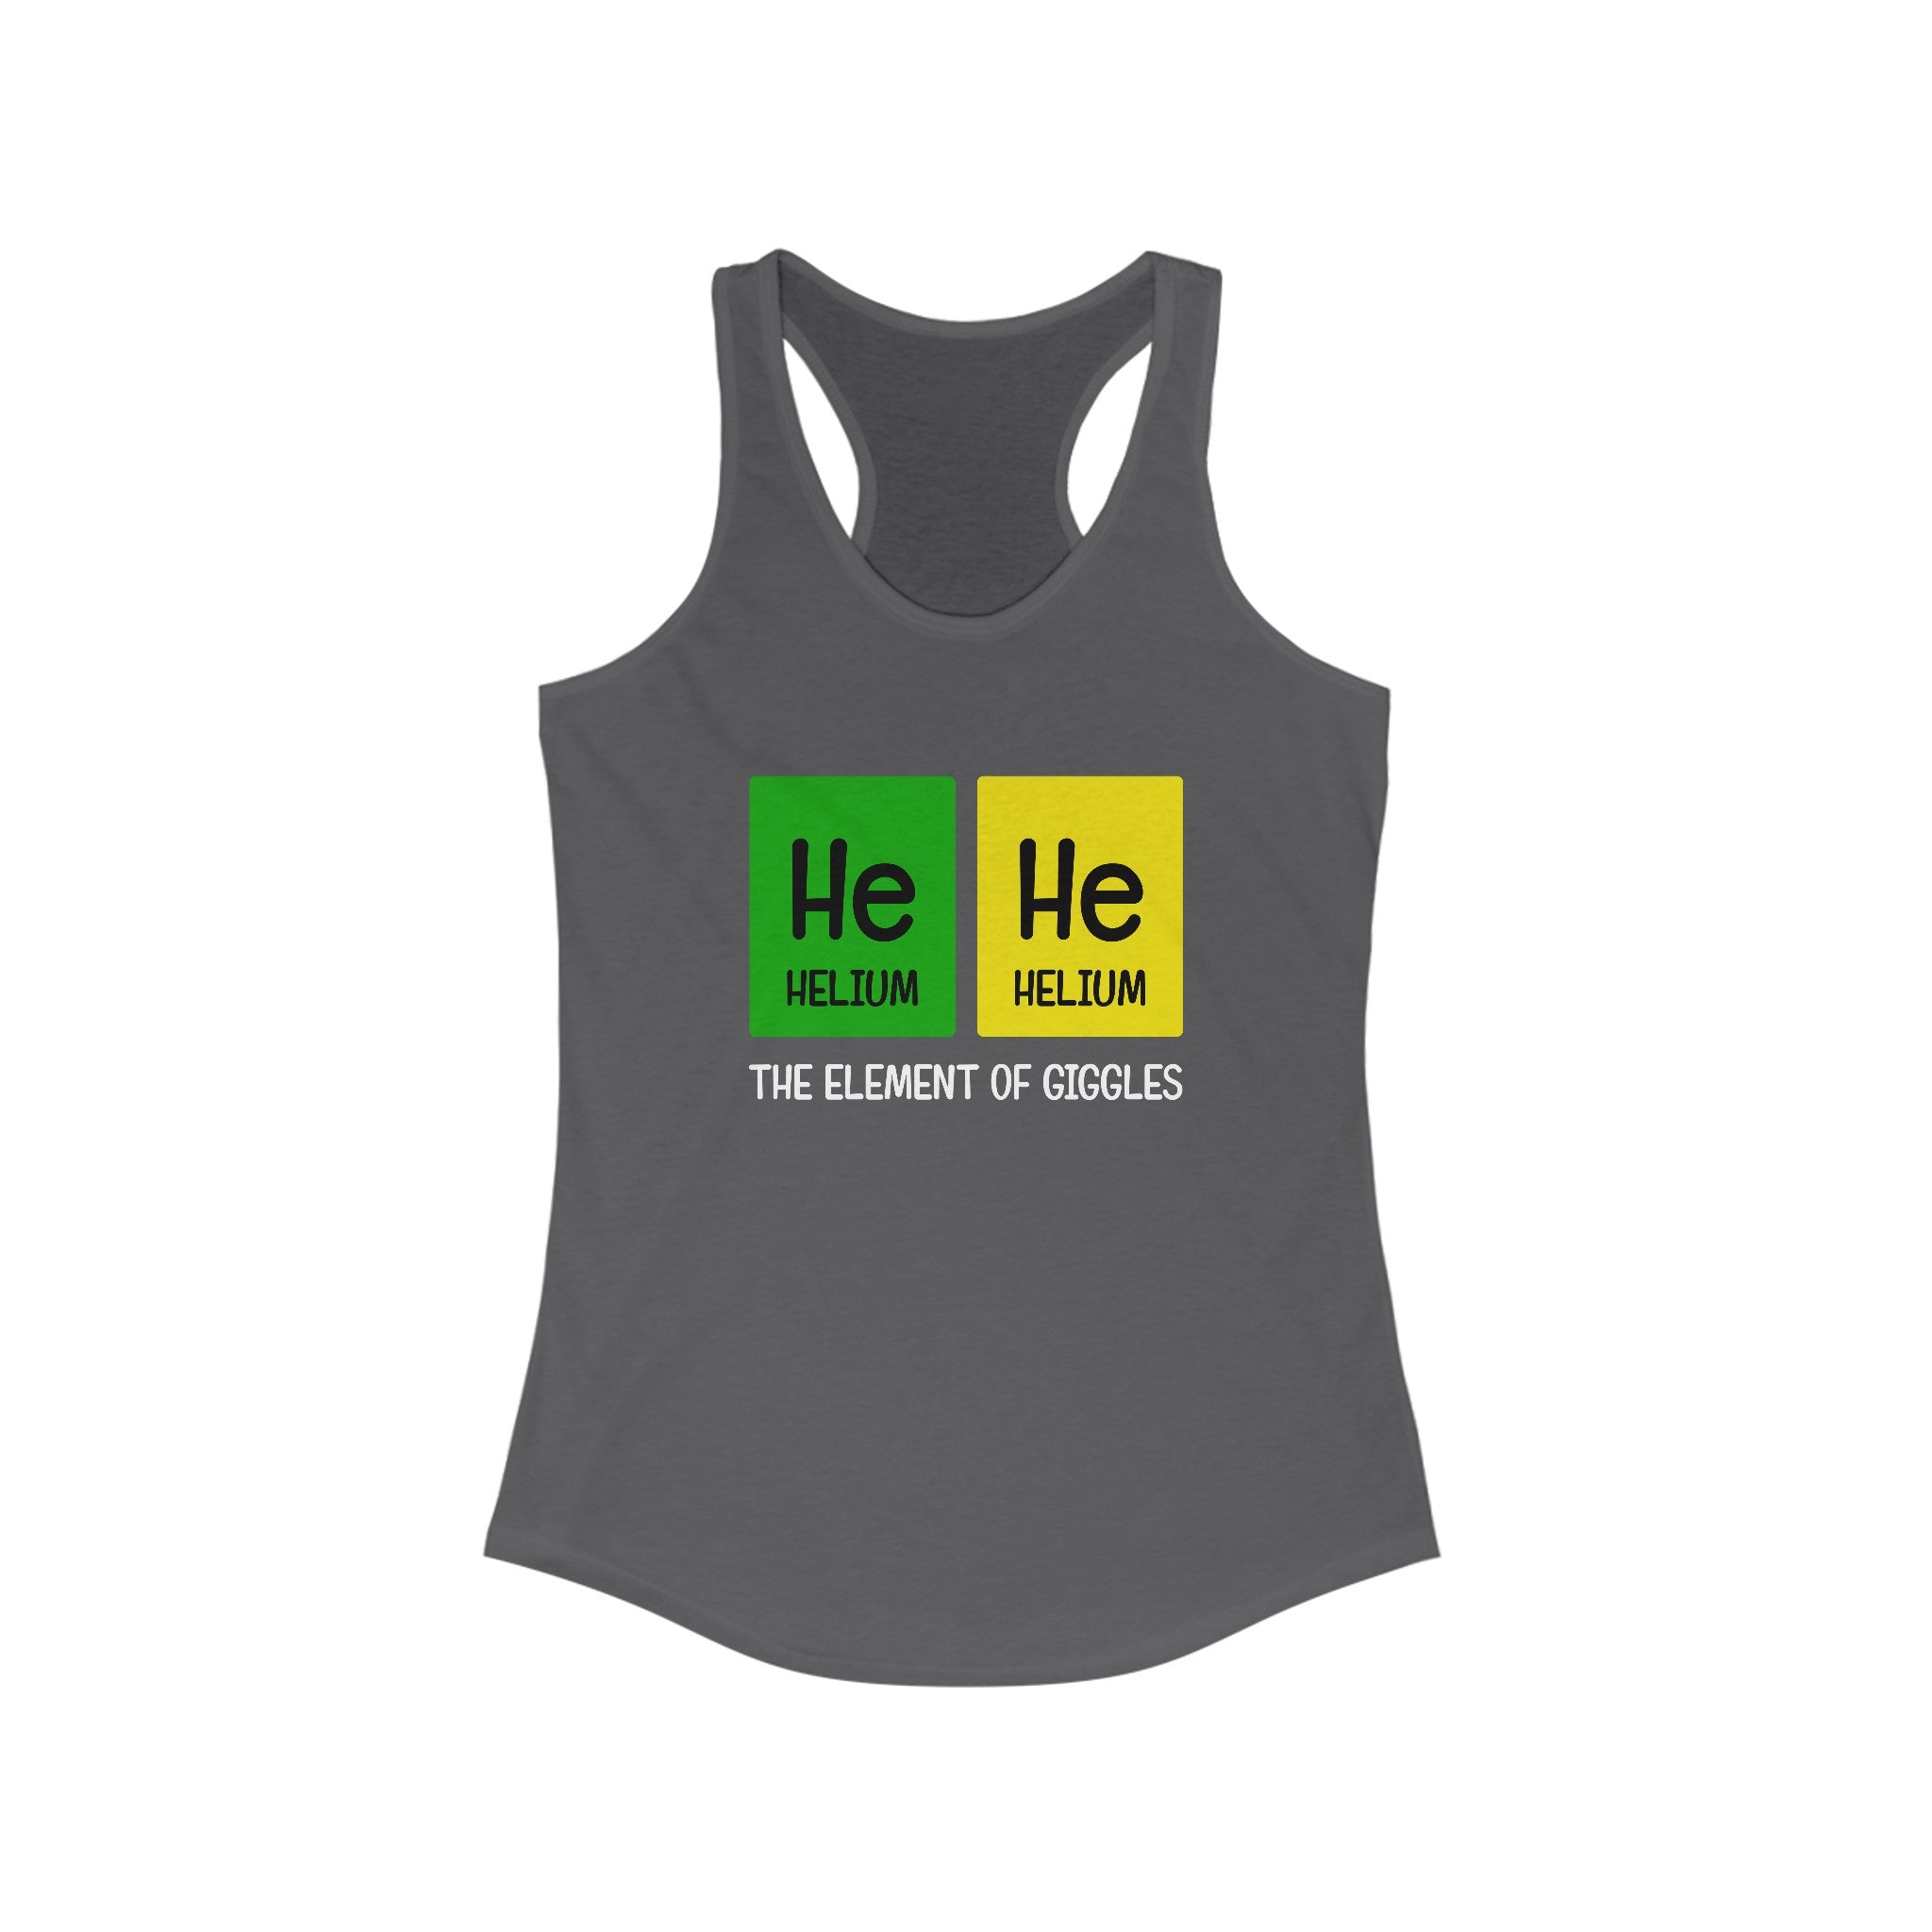 He-He - Women's Racerback Tank in dark gray featuring two boxes labeled "He Helium" and "He Helium" with the text "THE ELEMENT OF GIGGLES" below them, perfect for an active lifestyle. This lightweight top combines humor with comfort, making it ideal for workouts or casual wear.